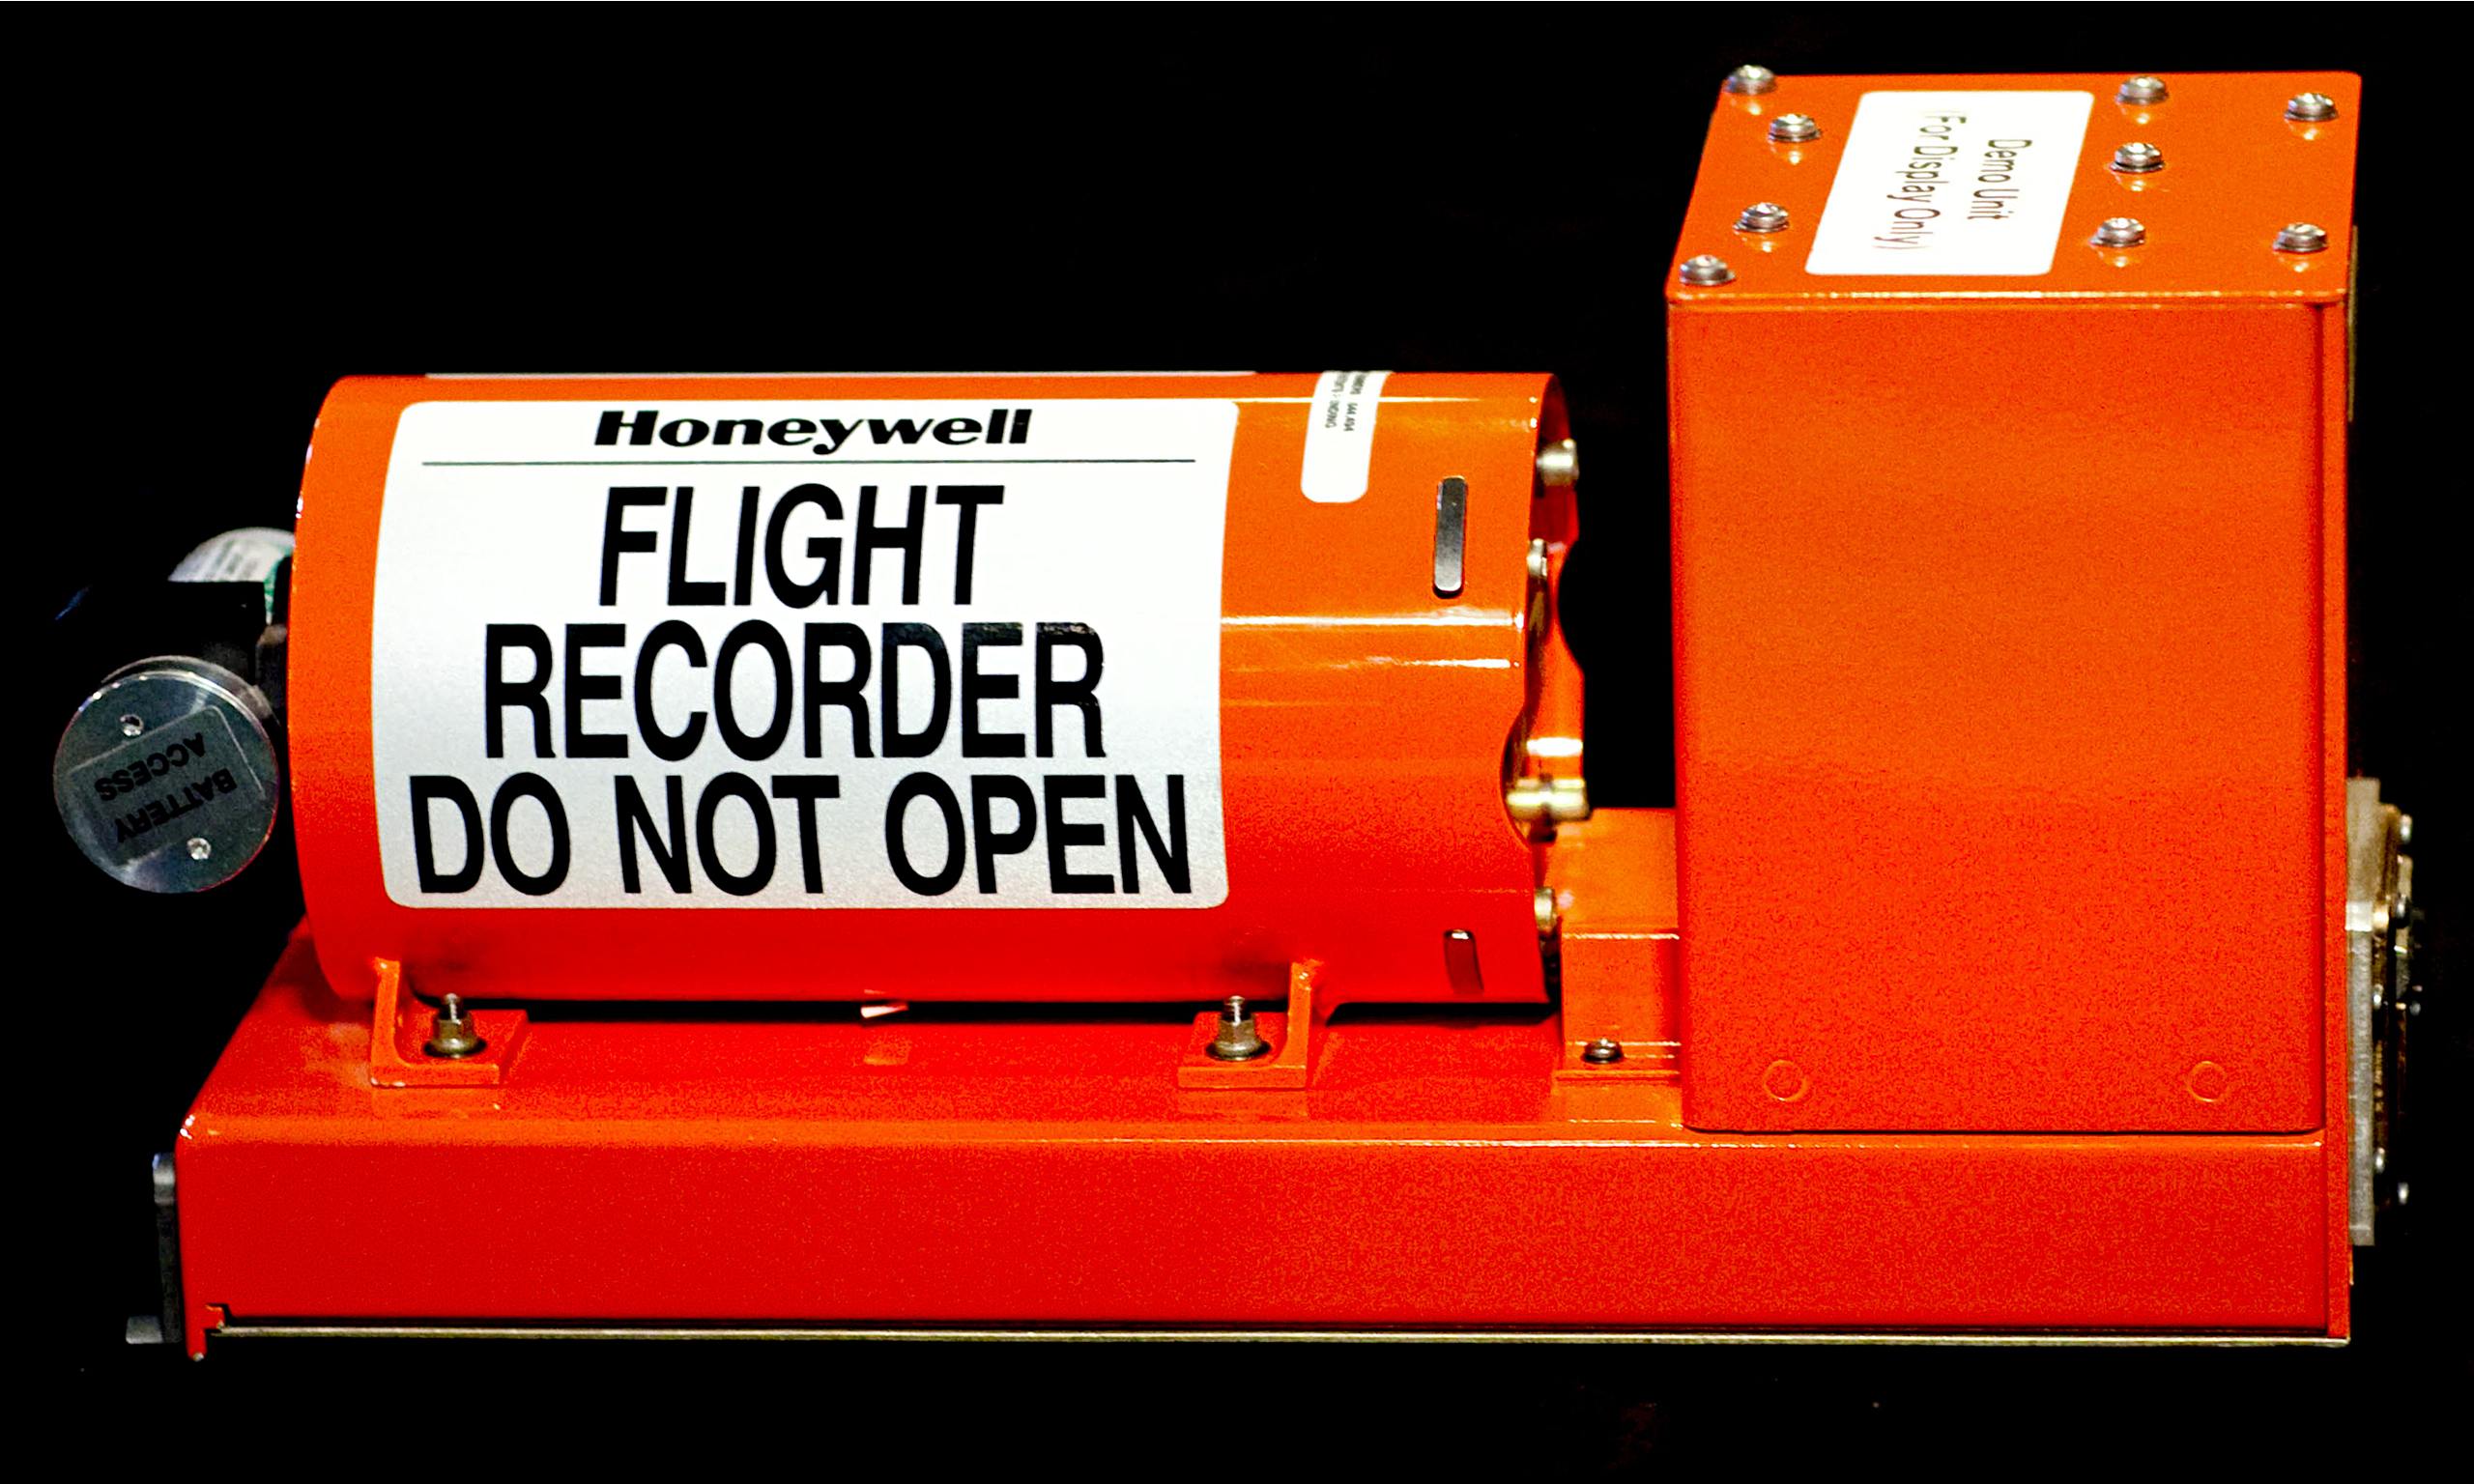 Secrets of the black box: how does MH370's flight recorder work